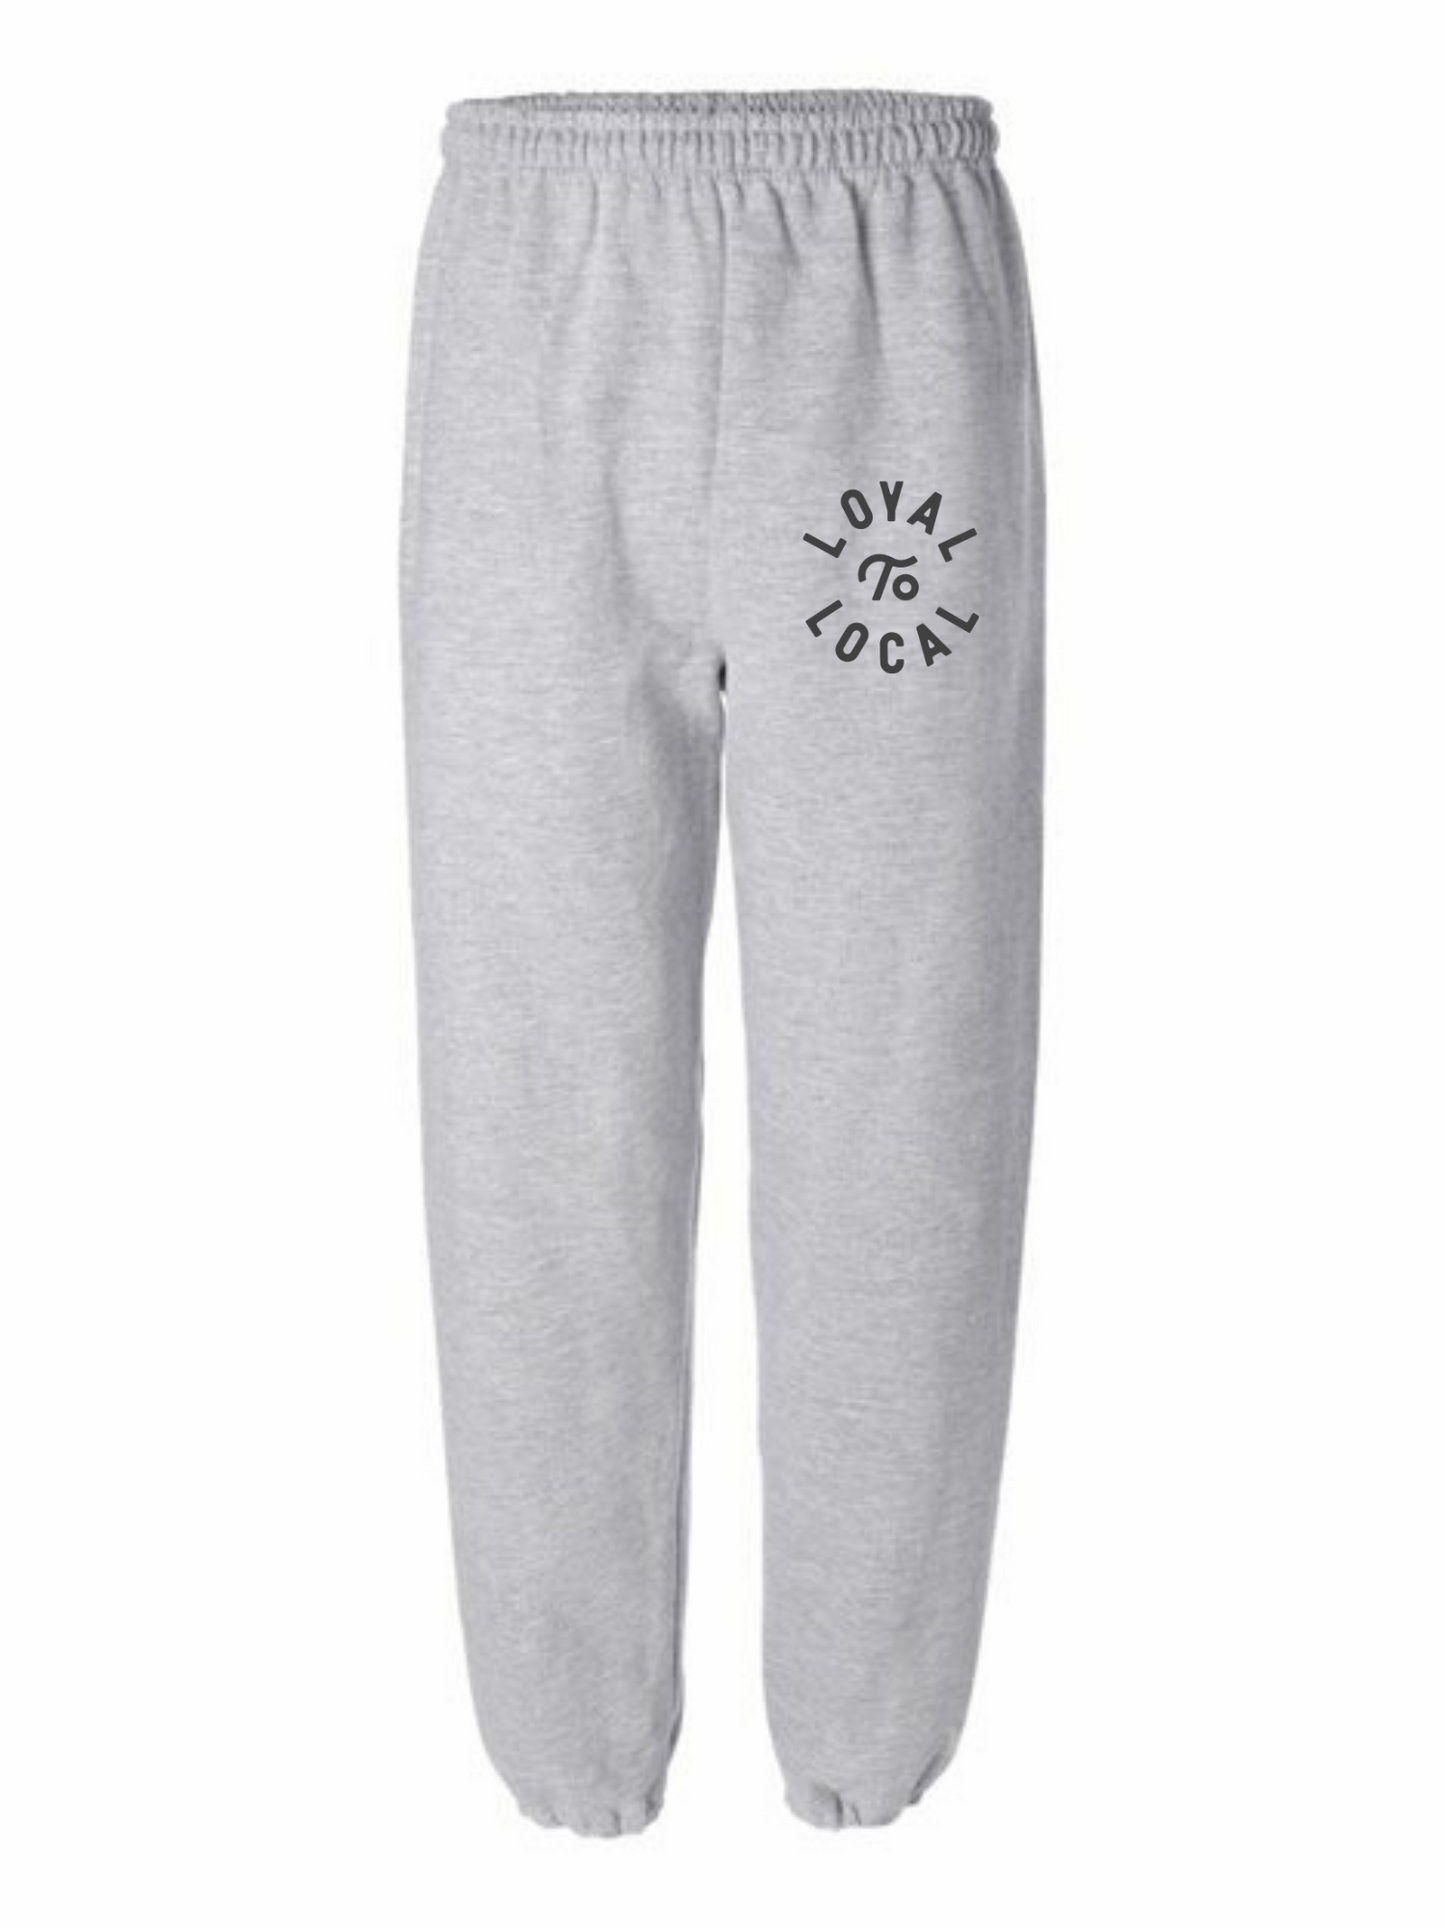 Loyal To Local Sweatpants | Charcoal on Athletic